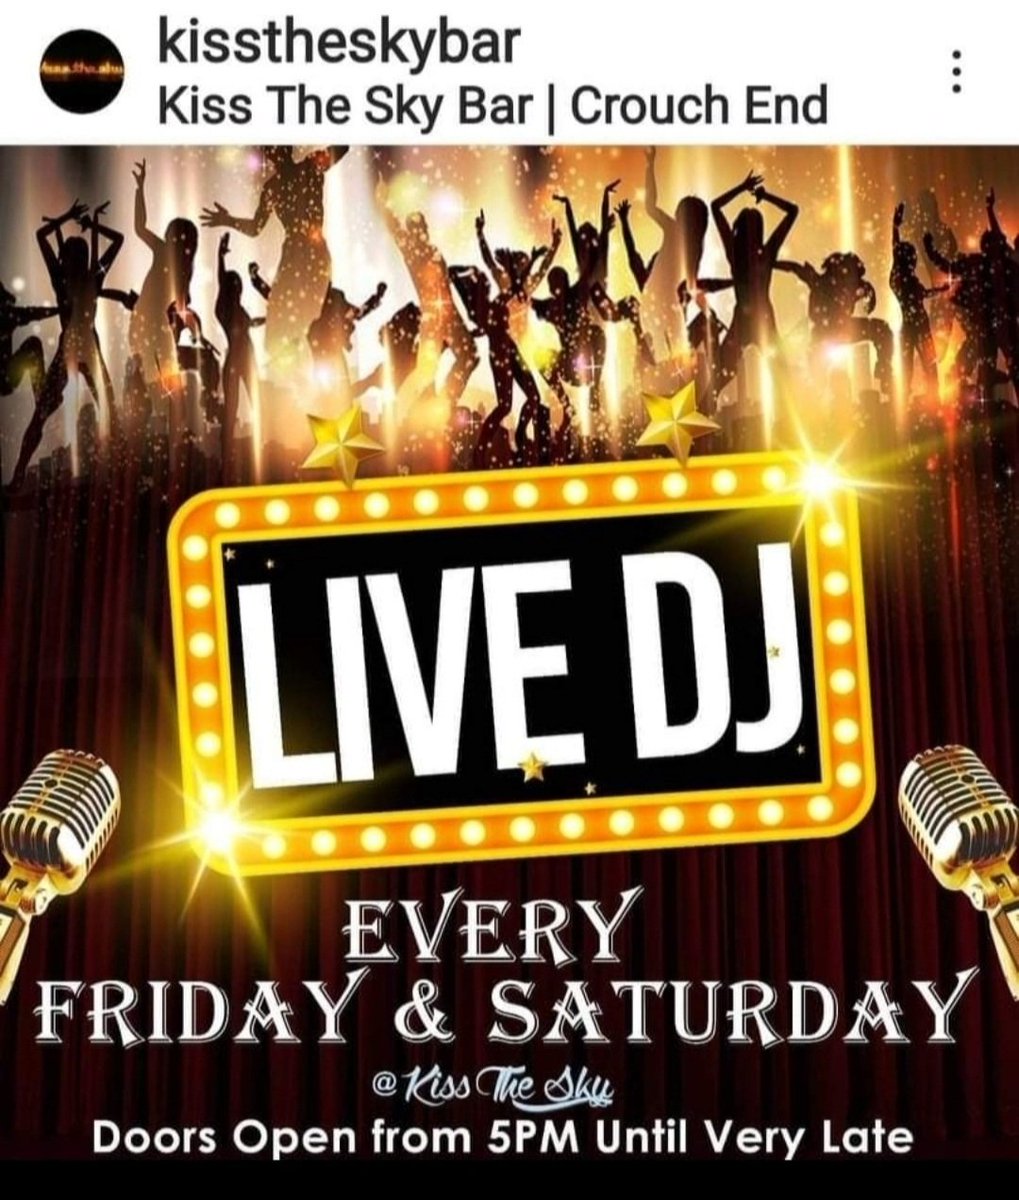 KISS THE SKY presents the LAST WEEKEND of JANUARY 2022 
PARTY NIGHT OUT FRIDAY 28th & SAT 29th 8.30pm-LATE 
RESIDENT DJ VICTOR ANDERSON playing
R'N'B, SOUL CLASSICS, REGGAE DANCEHALL, AFROBEATS, AMAPIANO, HOUSE, GARAGE UK
FREE ADMISSION. SEE YOU THERE.
https://t.co/rDL079wsgr https://t.co/B4zAtVxsAB